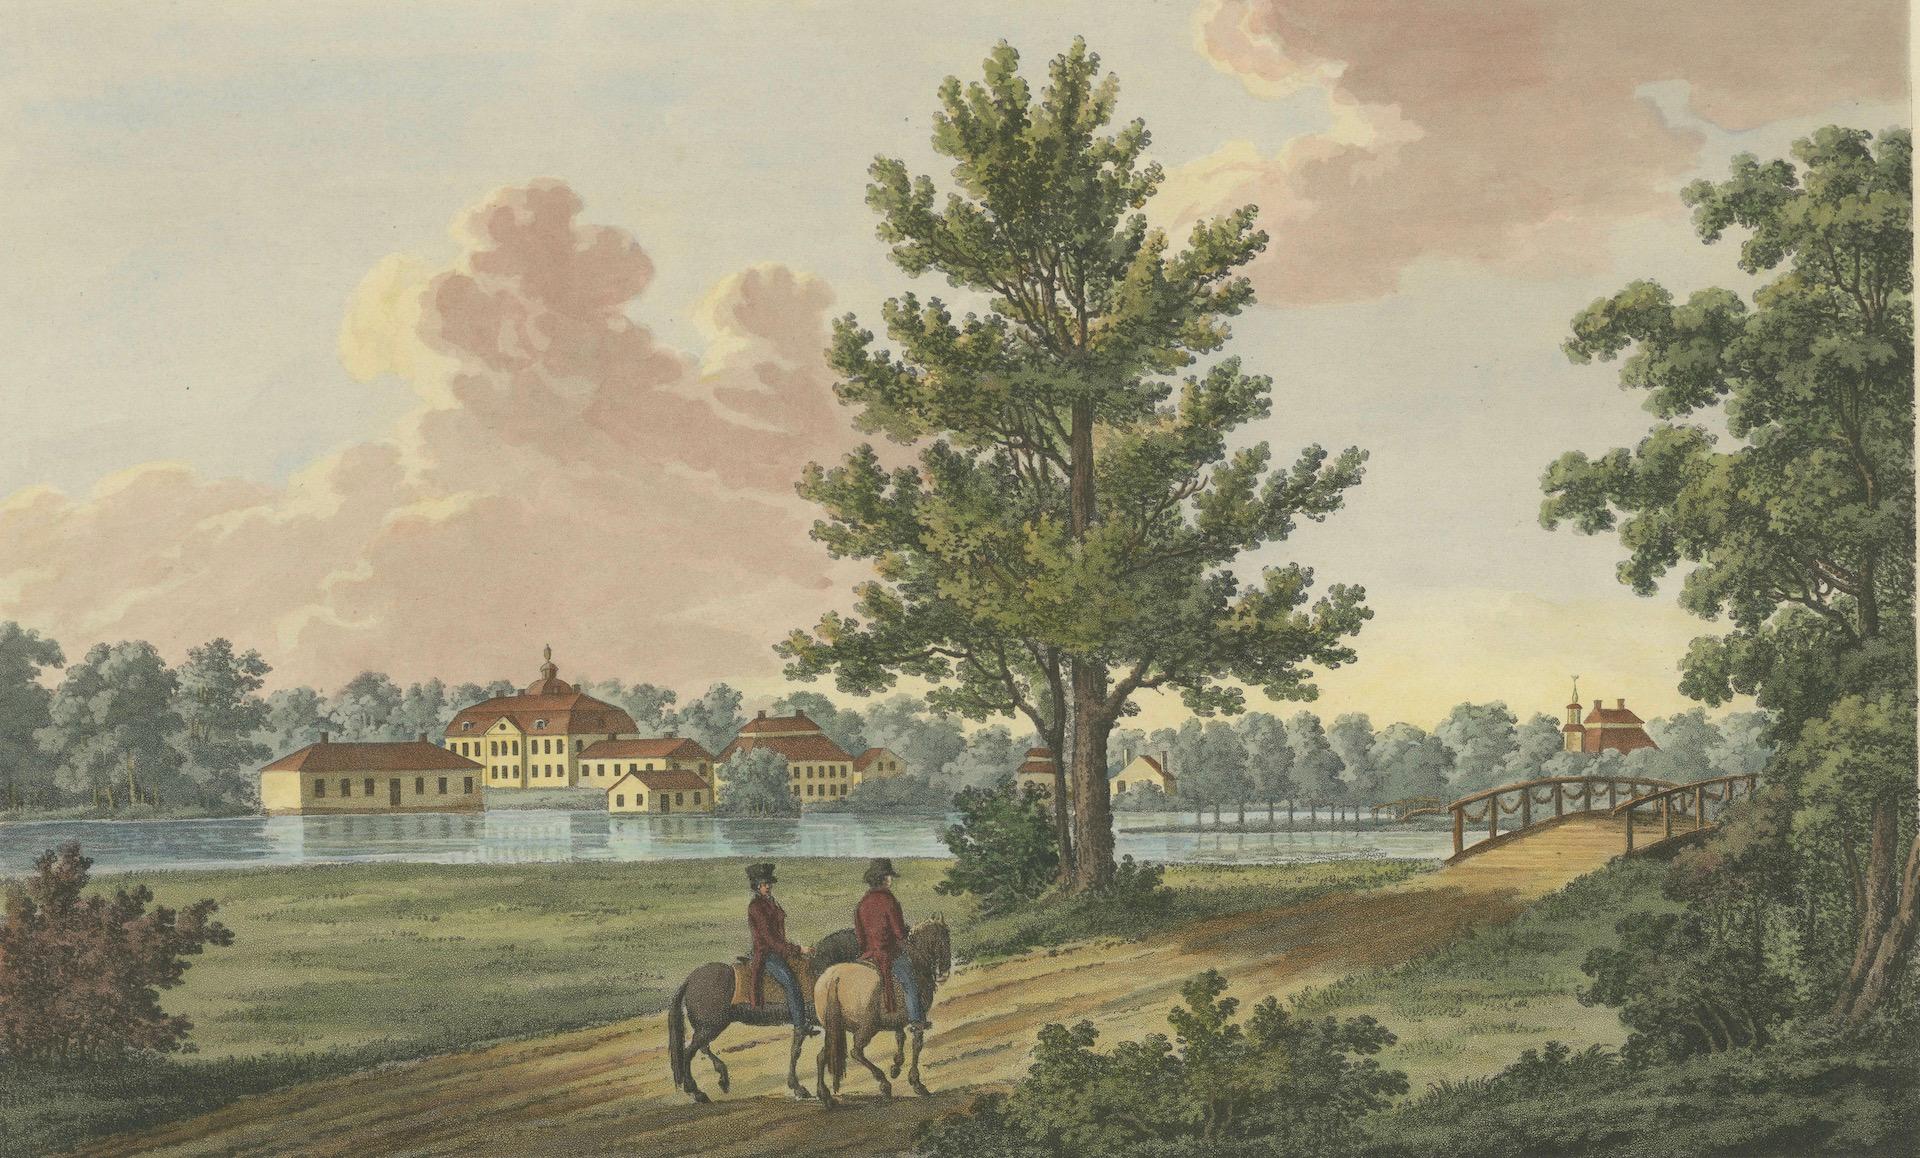 Gentle Repose at Österby: An 1824 Aquatint by Ulrik Thersner For Sale 1